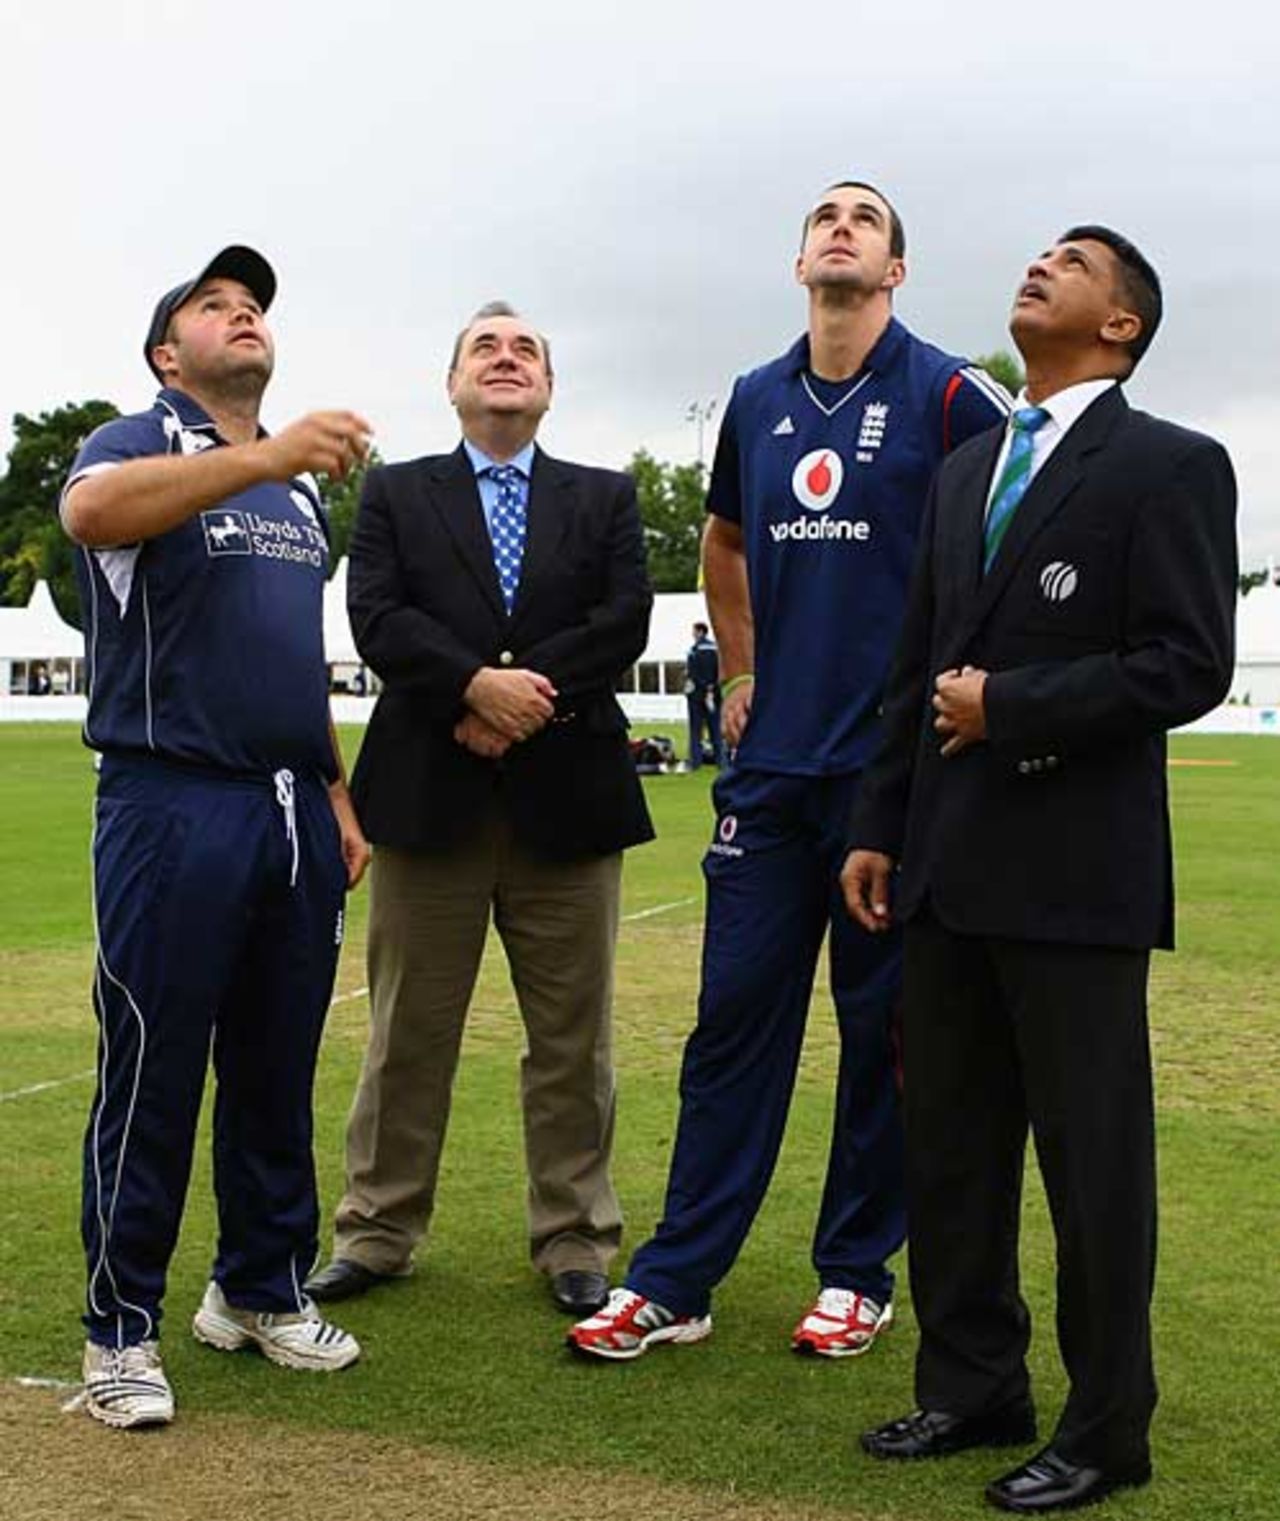 Kevin Pietersen and Ryan Watson at the toss with Scotland's first minister Alex Salmond, Scotland v England, Only ODI, Edinburgh, August 18, 2008